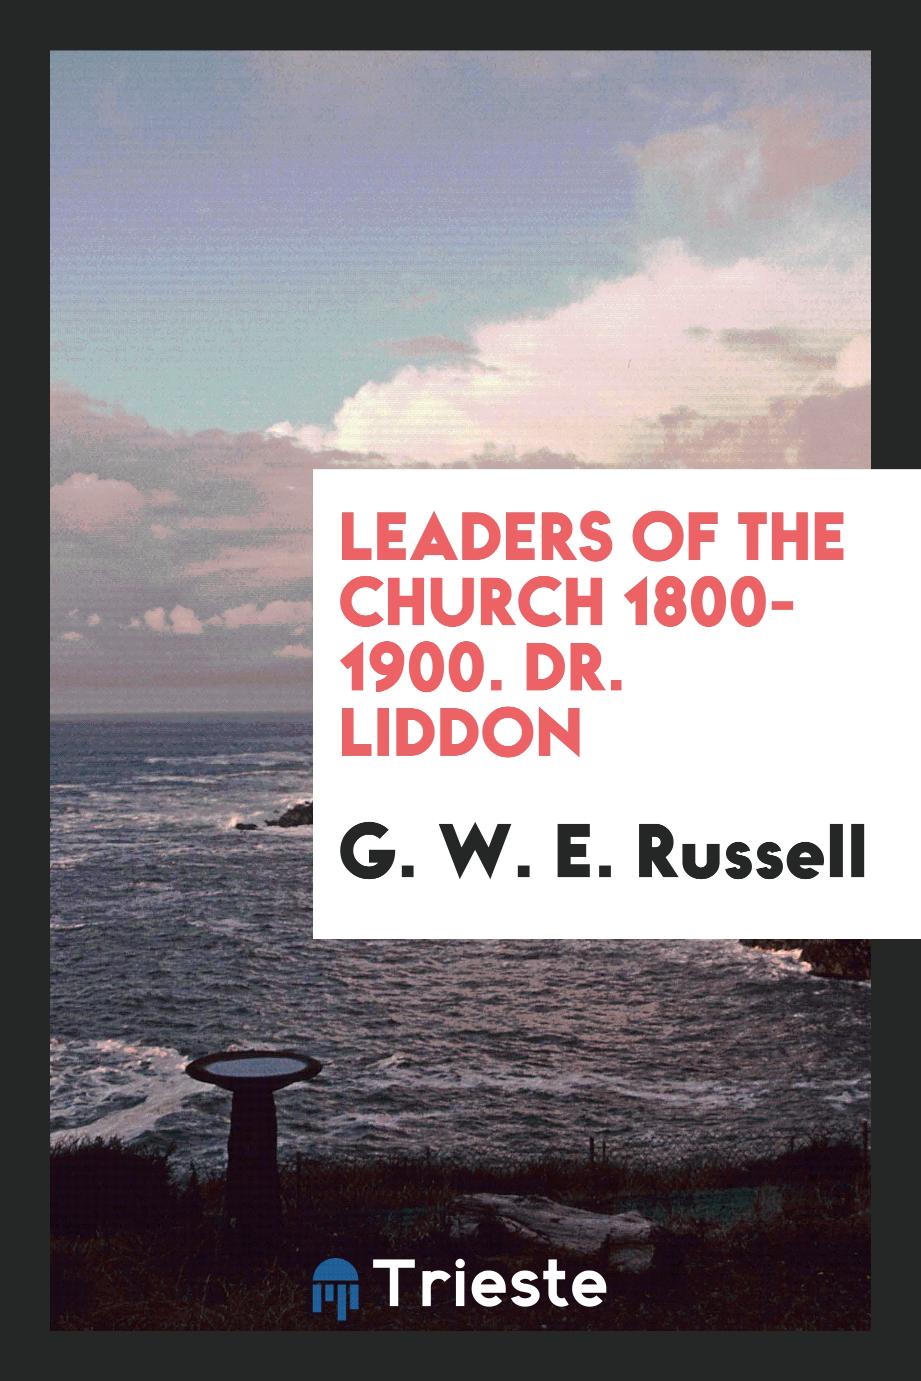 G. W. E. Russell - Leaders of the Church 1800-1900. Dr. Liddon